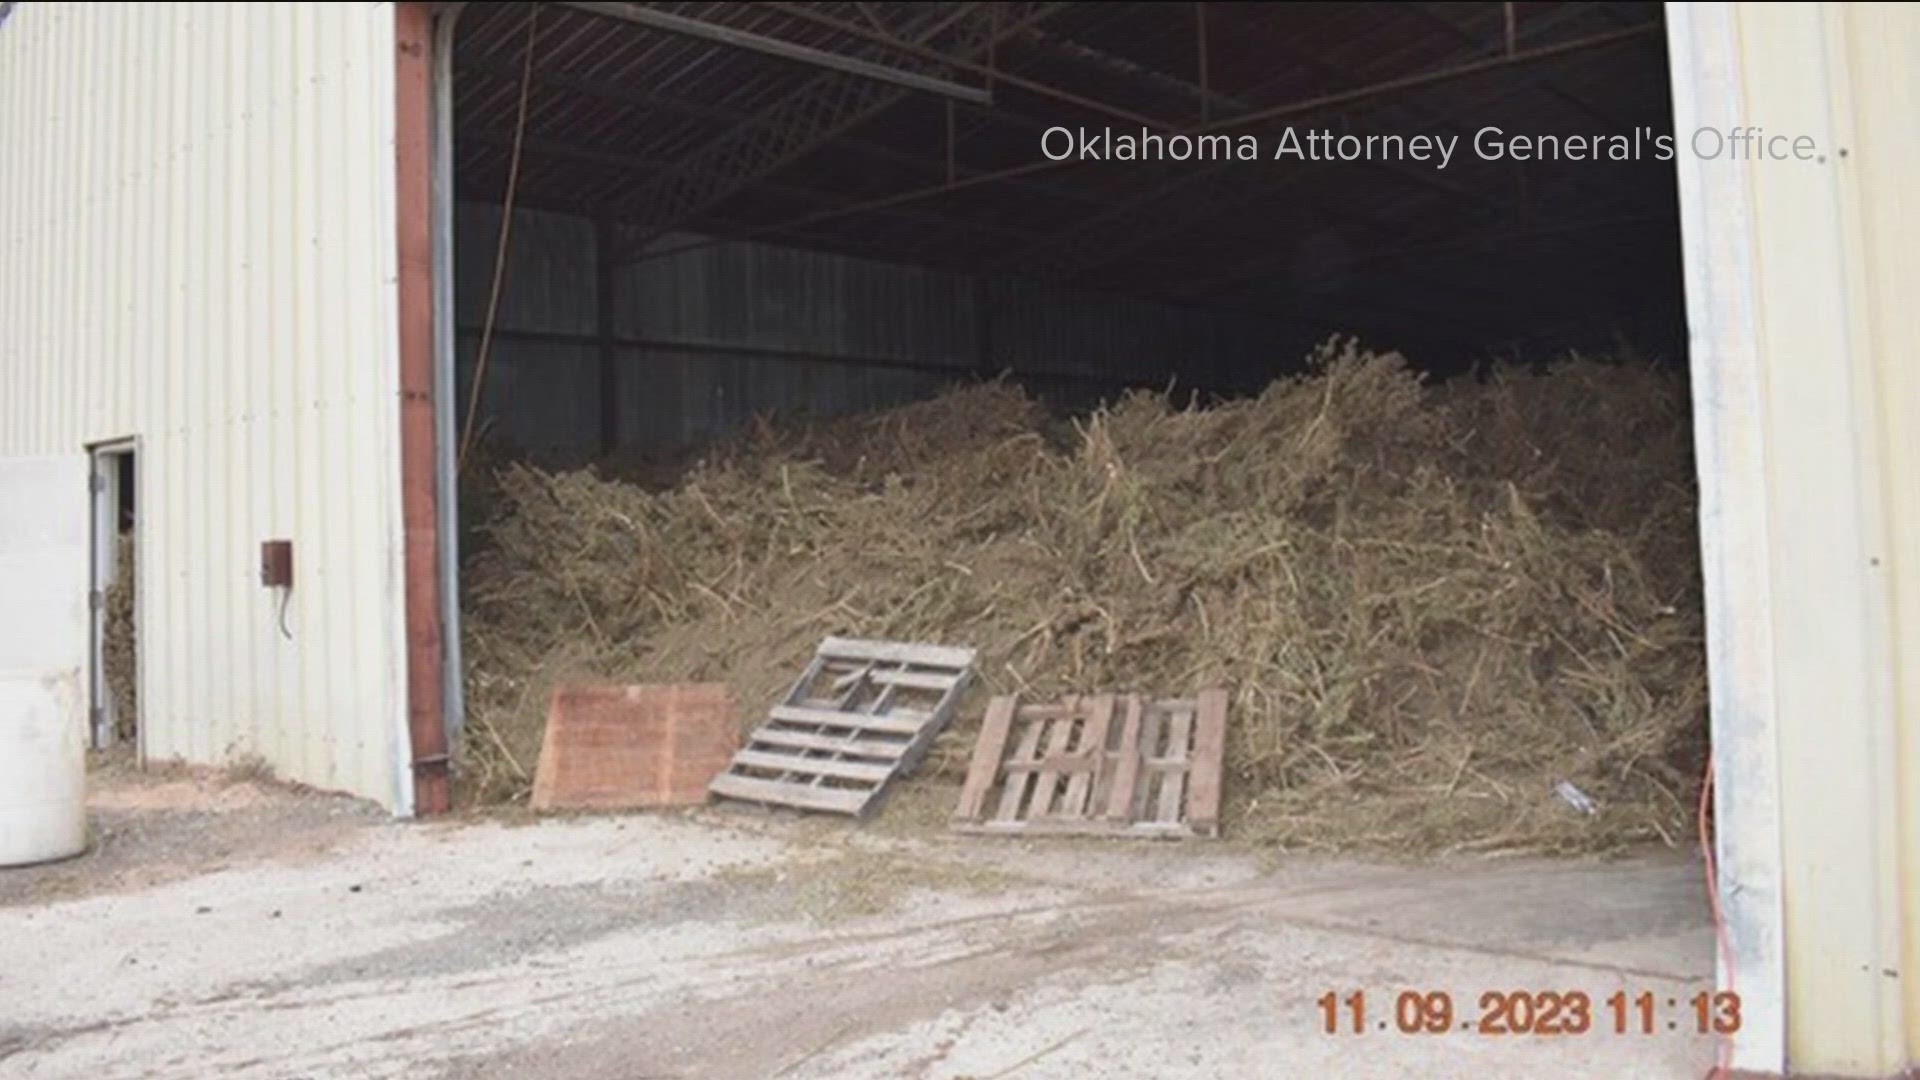 According to the Oklahoma Attorney General's Office, the state's Organized Crime Task Force seized over 36 tons of illegal marijuana in Oklahoma on Nov. 9, 2023.